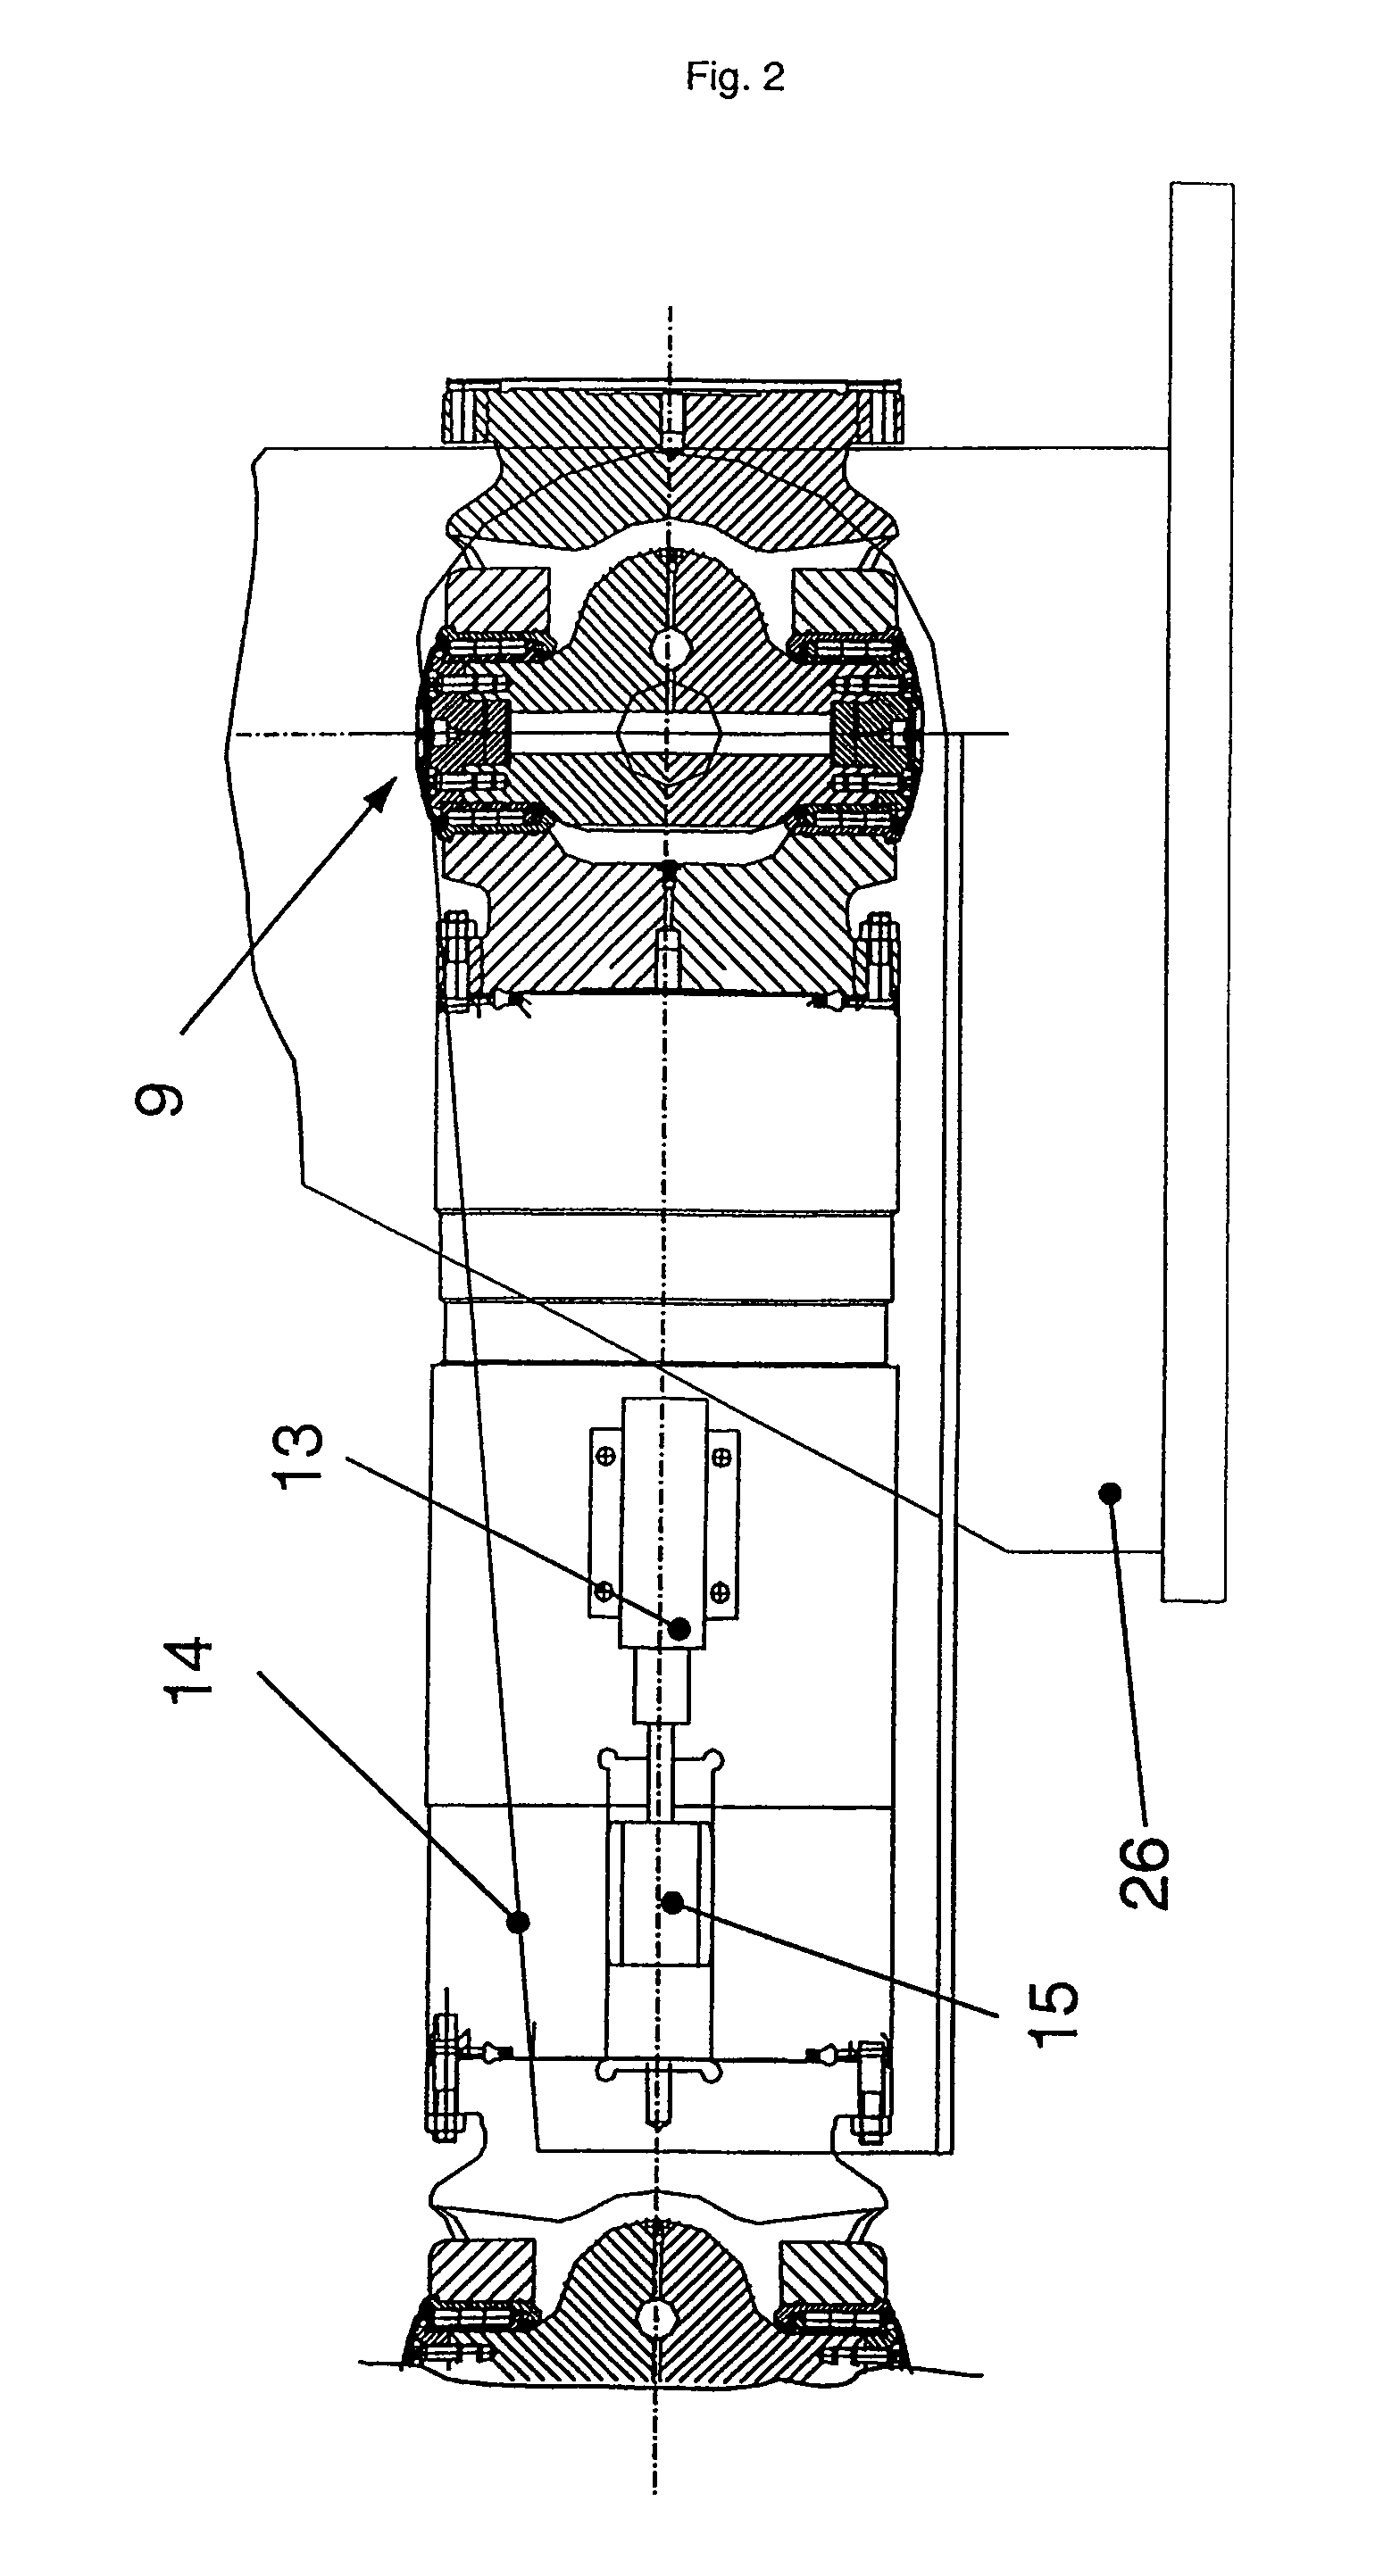 Roll stand provided with a displacement device